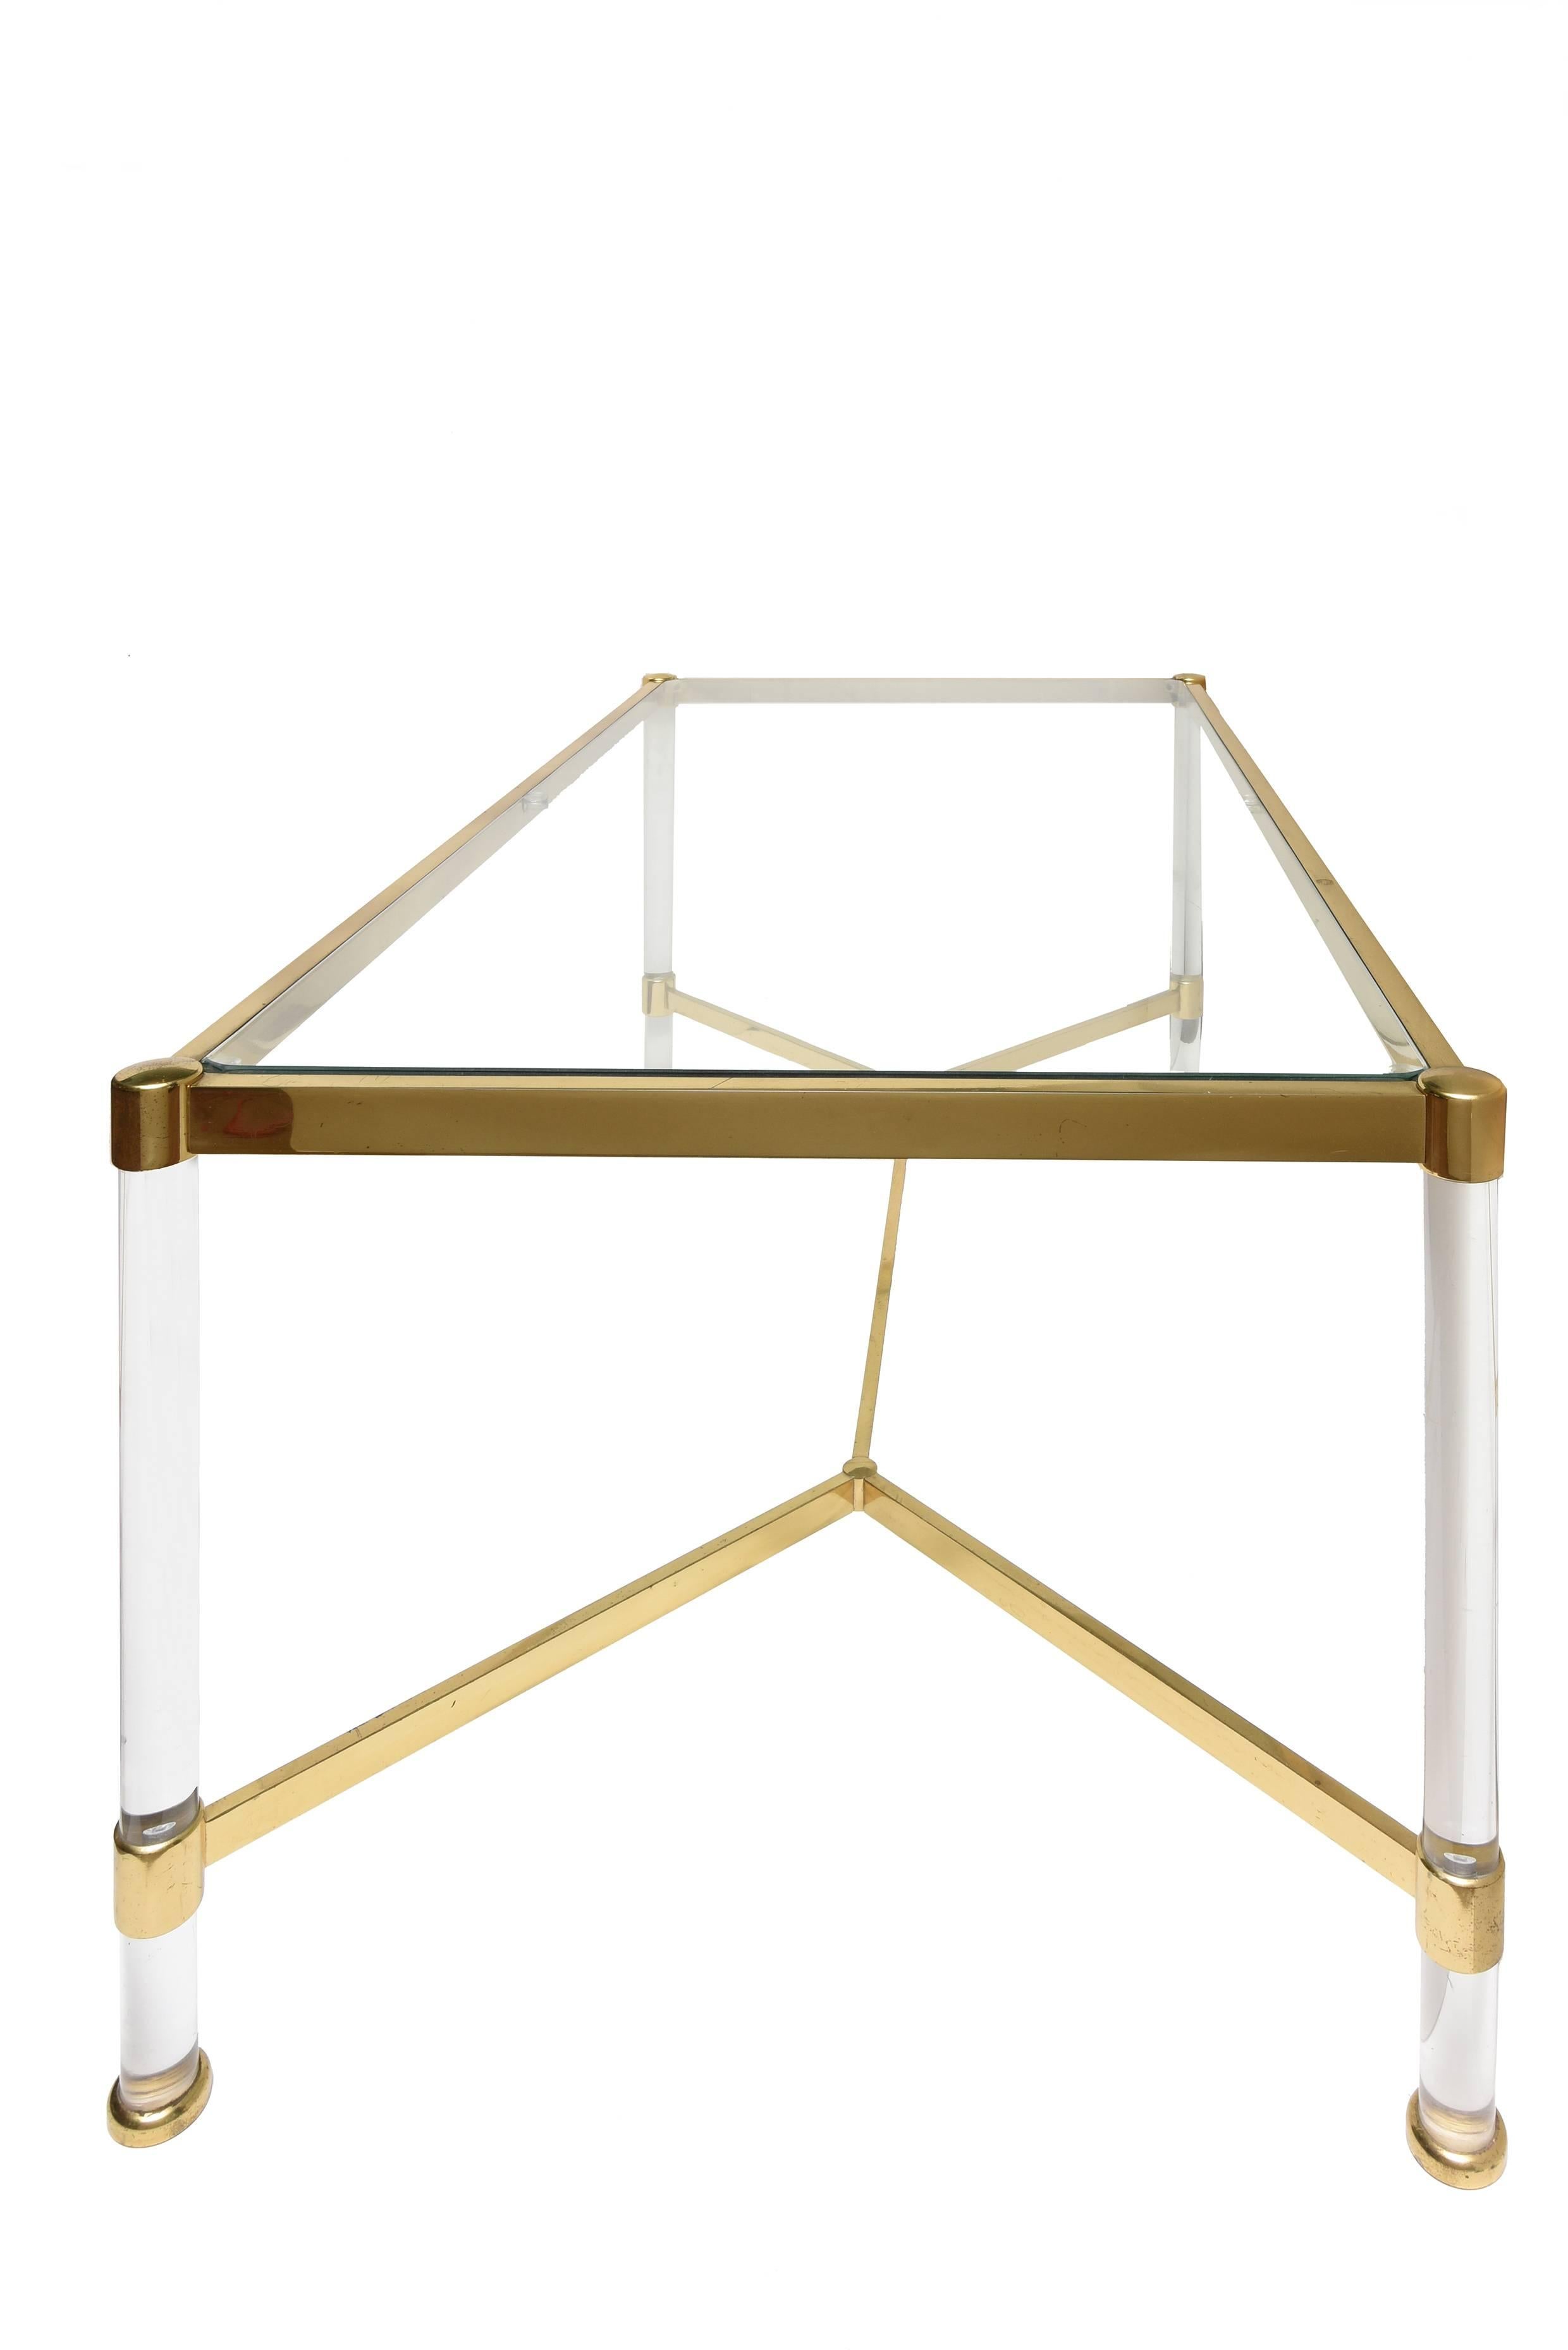 Italian Mid-Century Modern Lucite and Brass Coffee Table For Sale